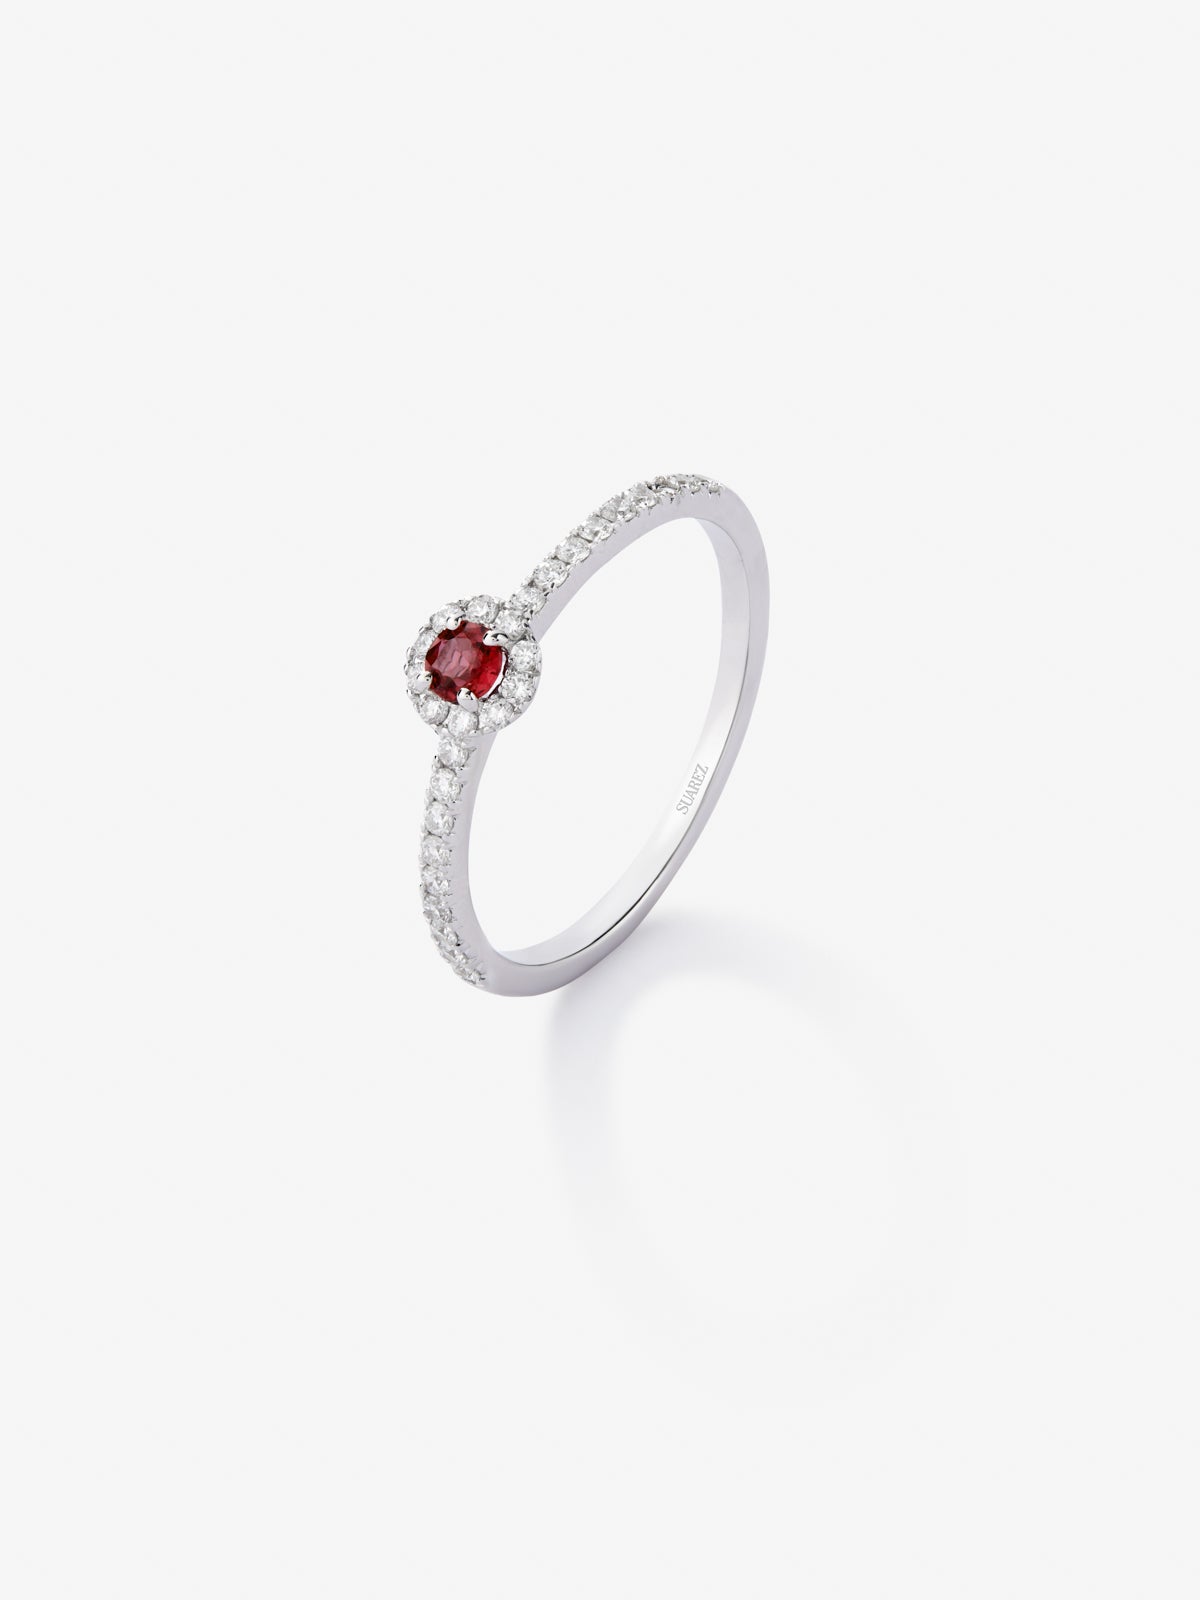 18K white gold ring with brilliant-cut red ruby ​​of 0.1 cts and border and arm of 28 brilliant-cut diamonds with a total of 0.2 cts